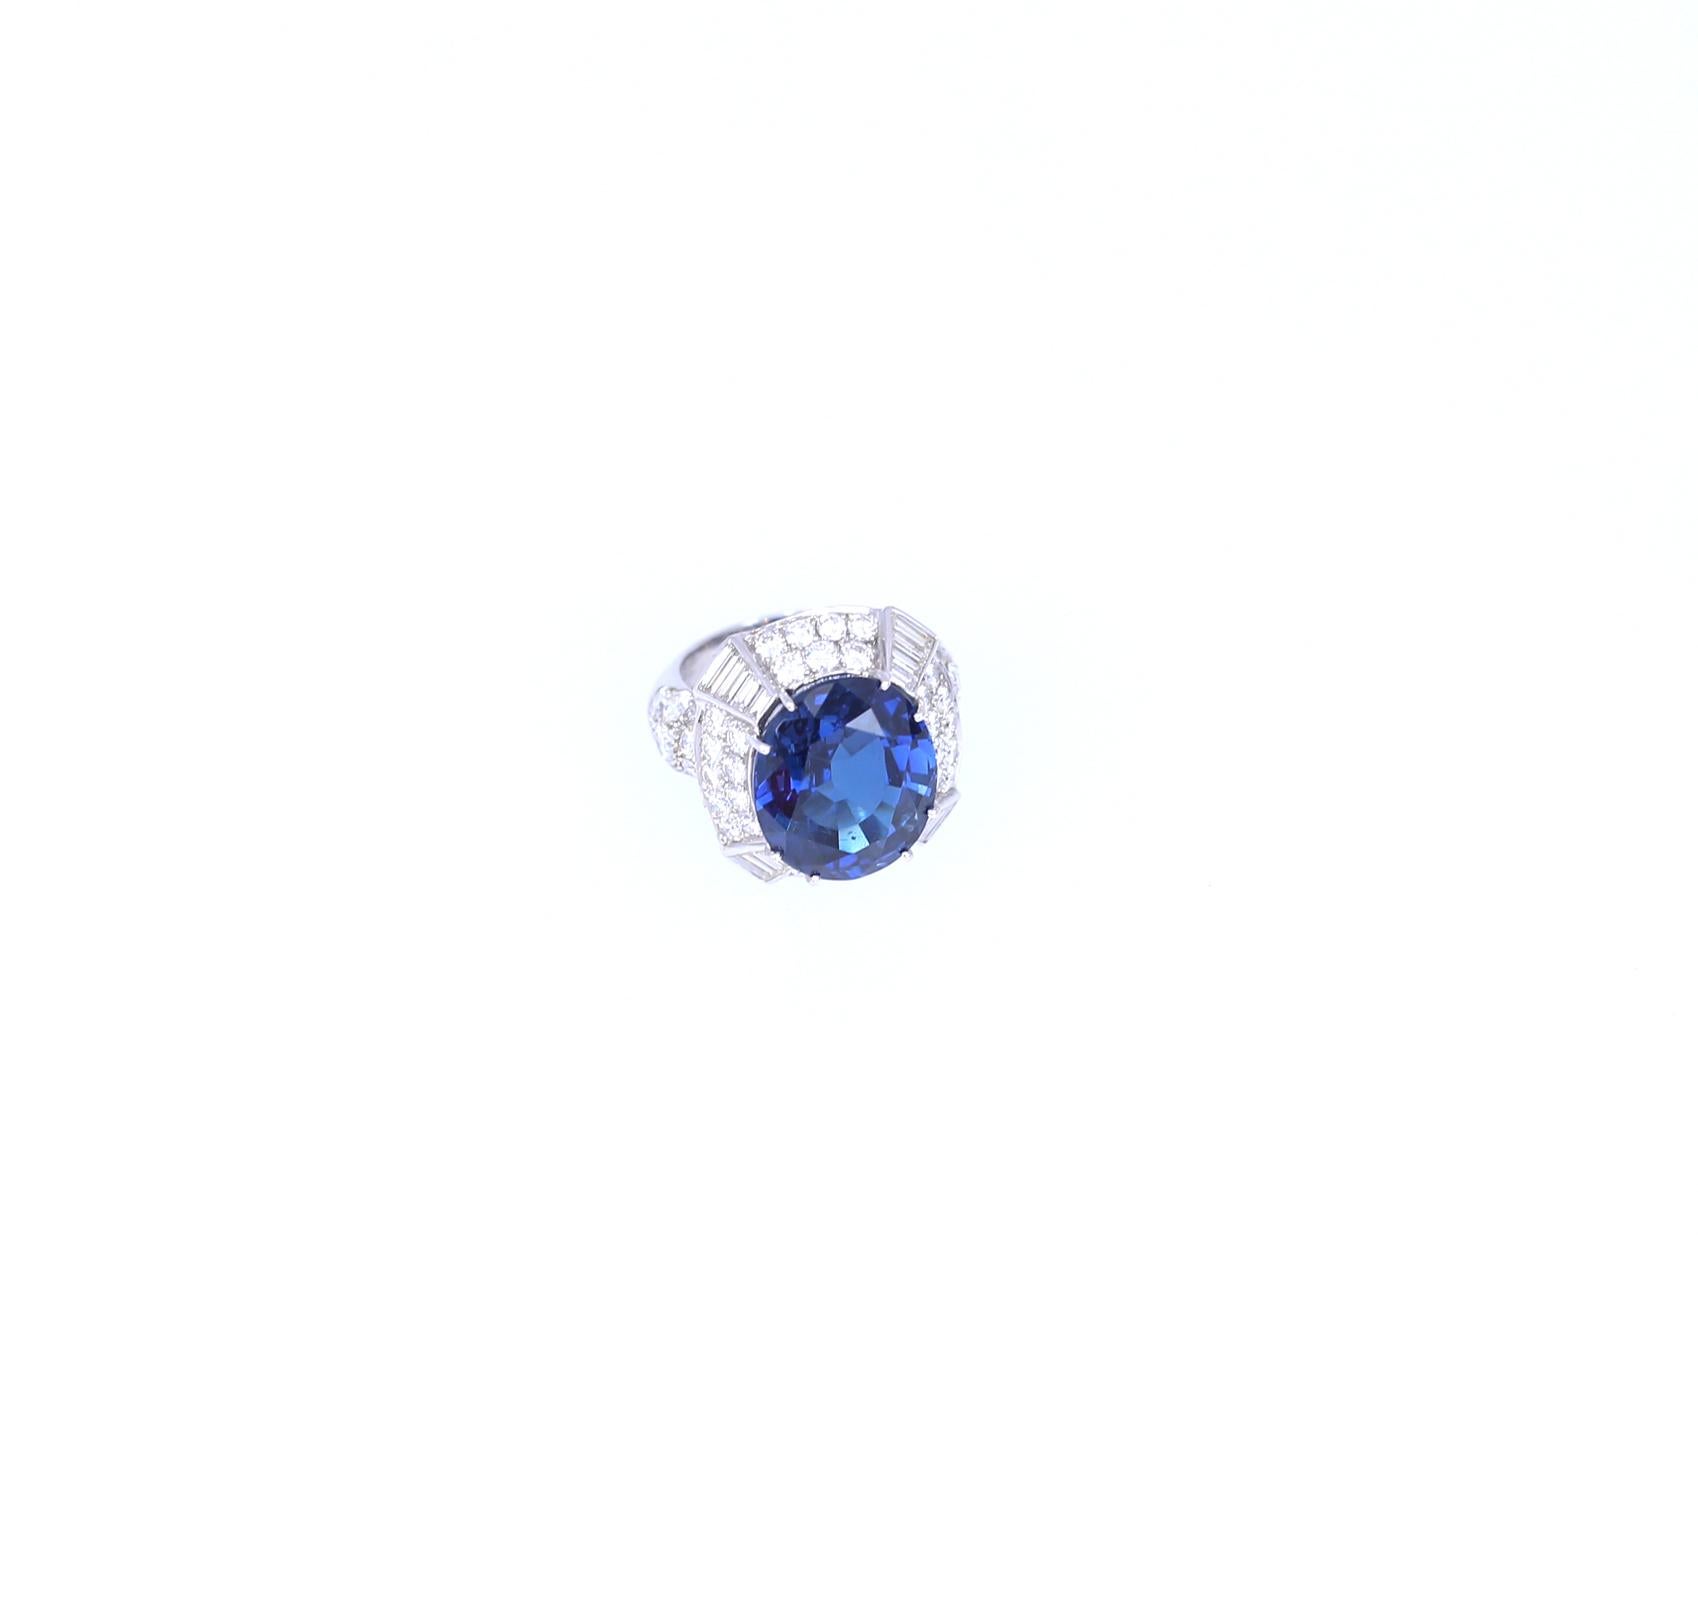 14.6 Ct Natural Sapphire Certified Diamond Ring 18K Gold, 1998 For Sale 8